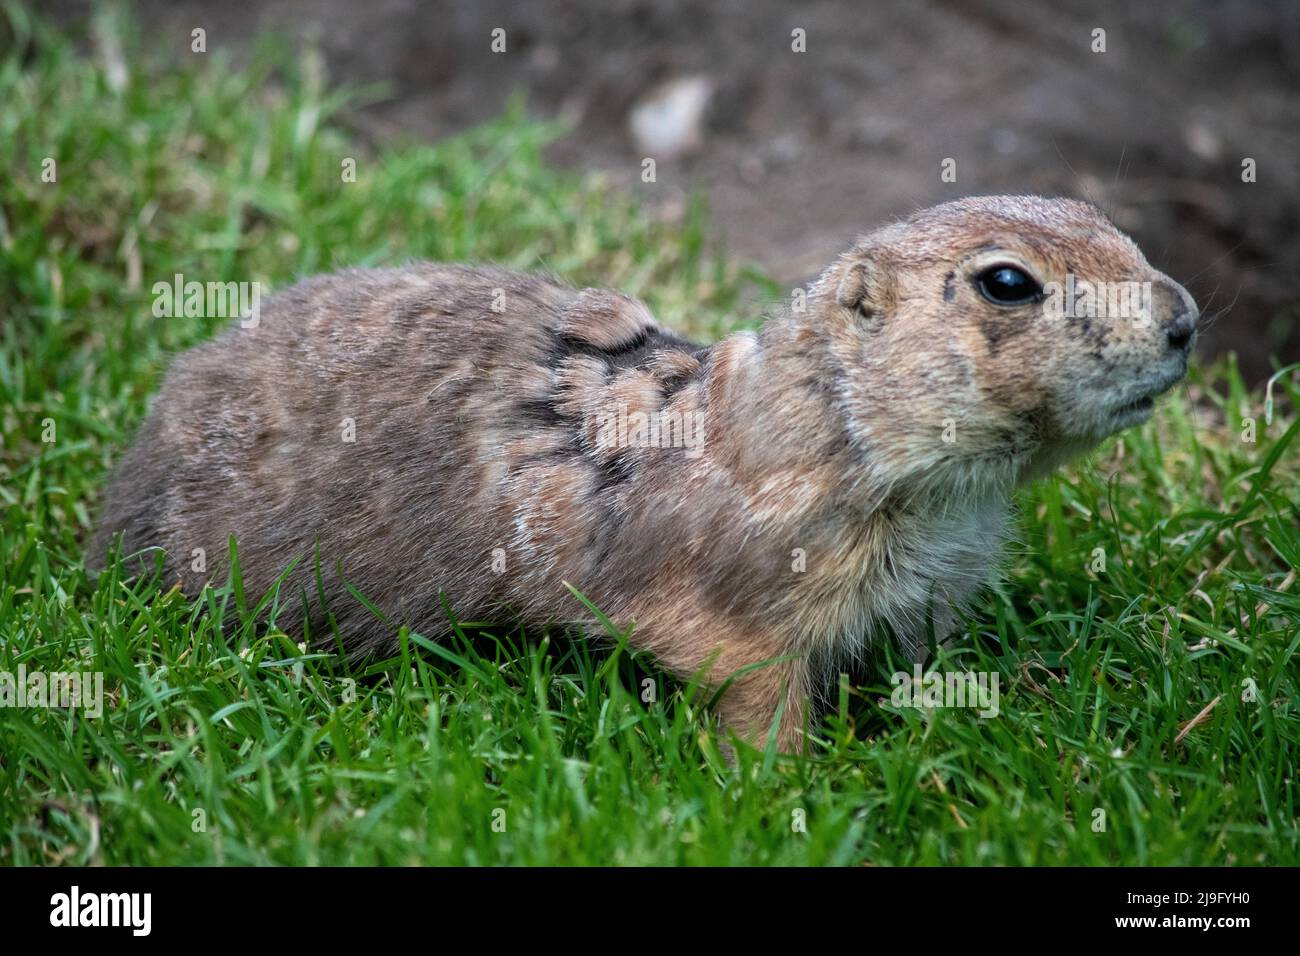 The black-tailed prairie dog (Cynomys ludovicianus) is a rodent of the family Sciuridae found in the Great Plains of North America. Budapest Zoo, Buda Stock Photo